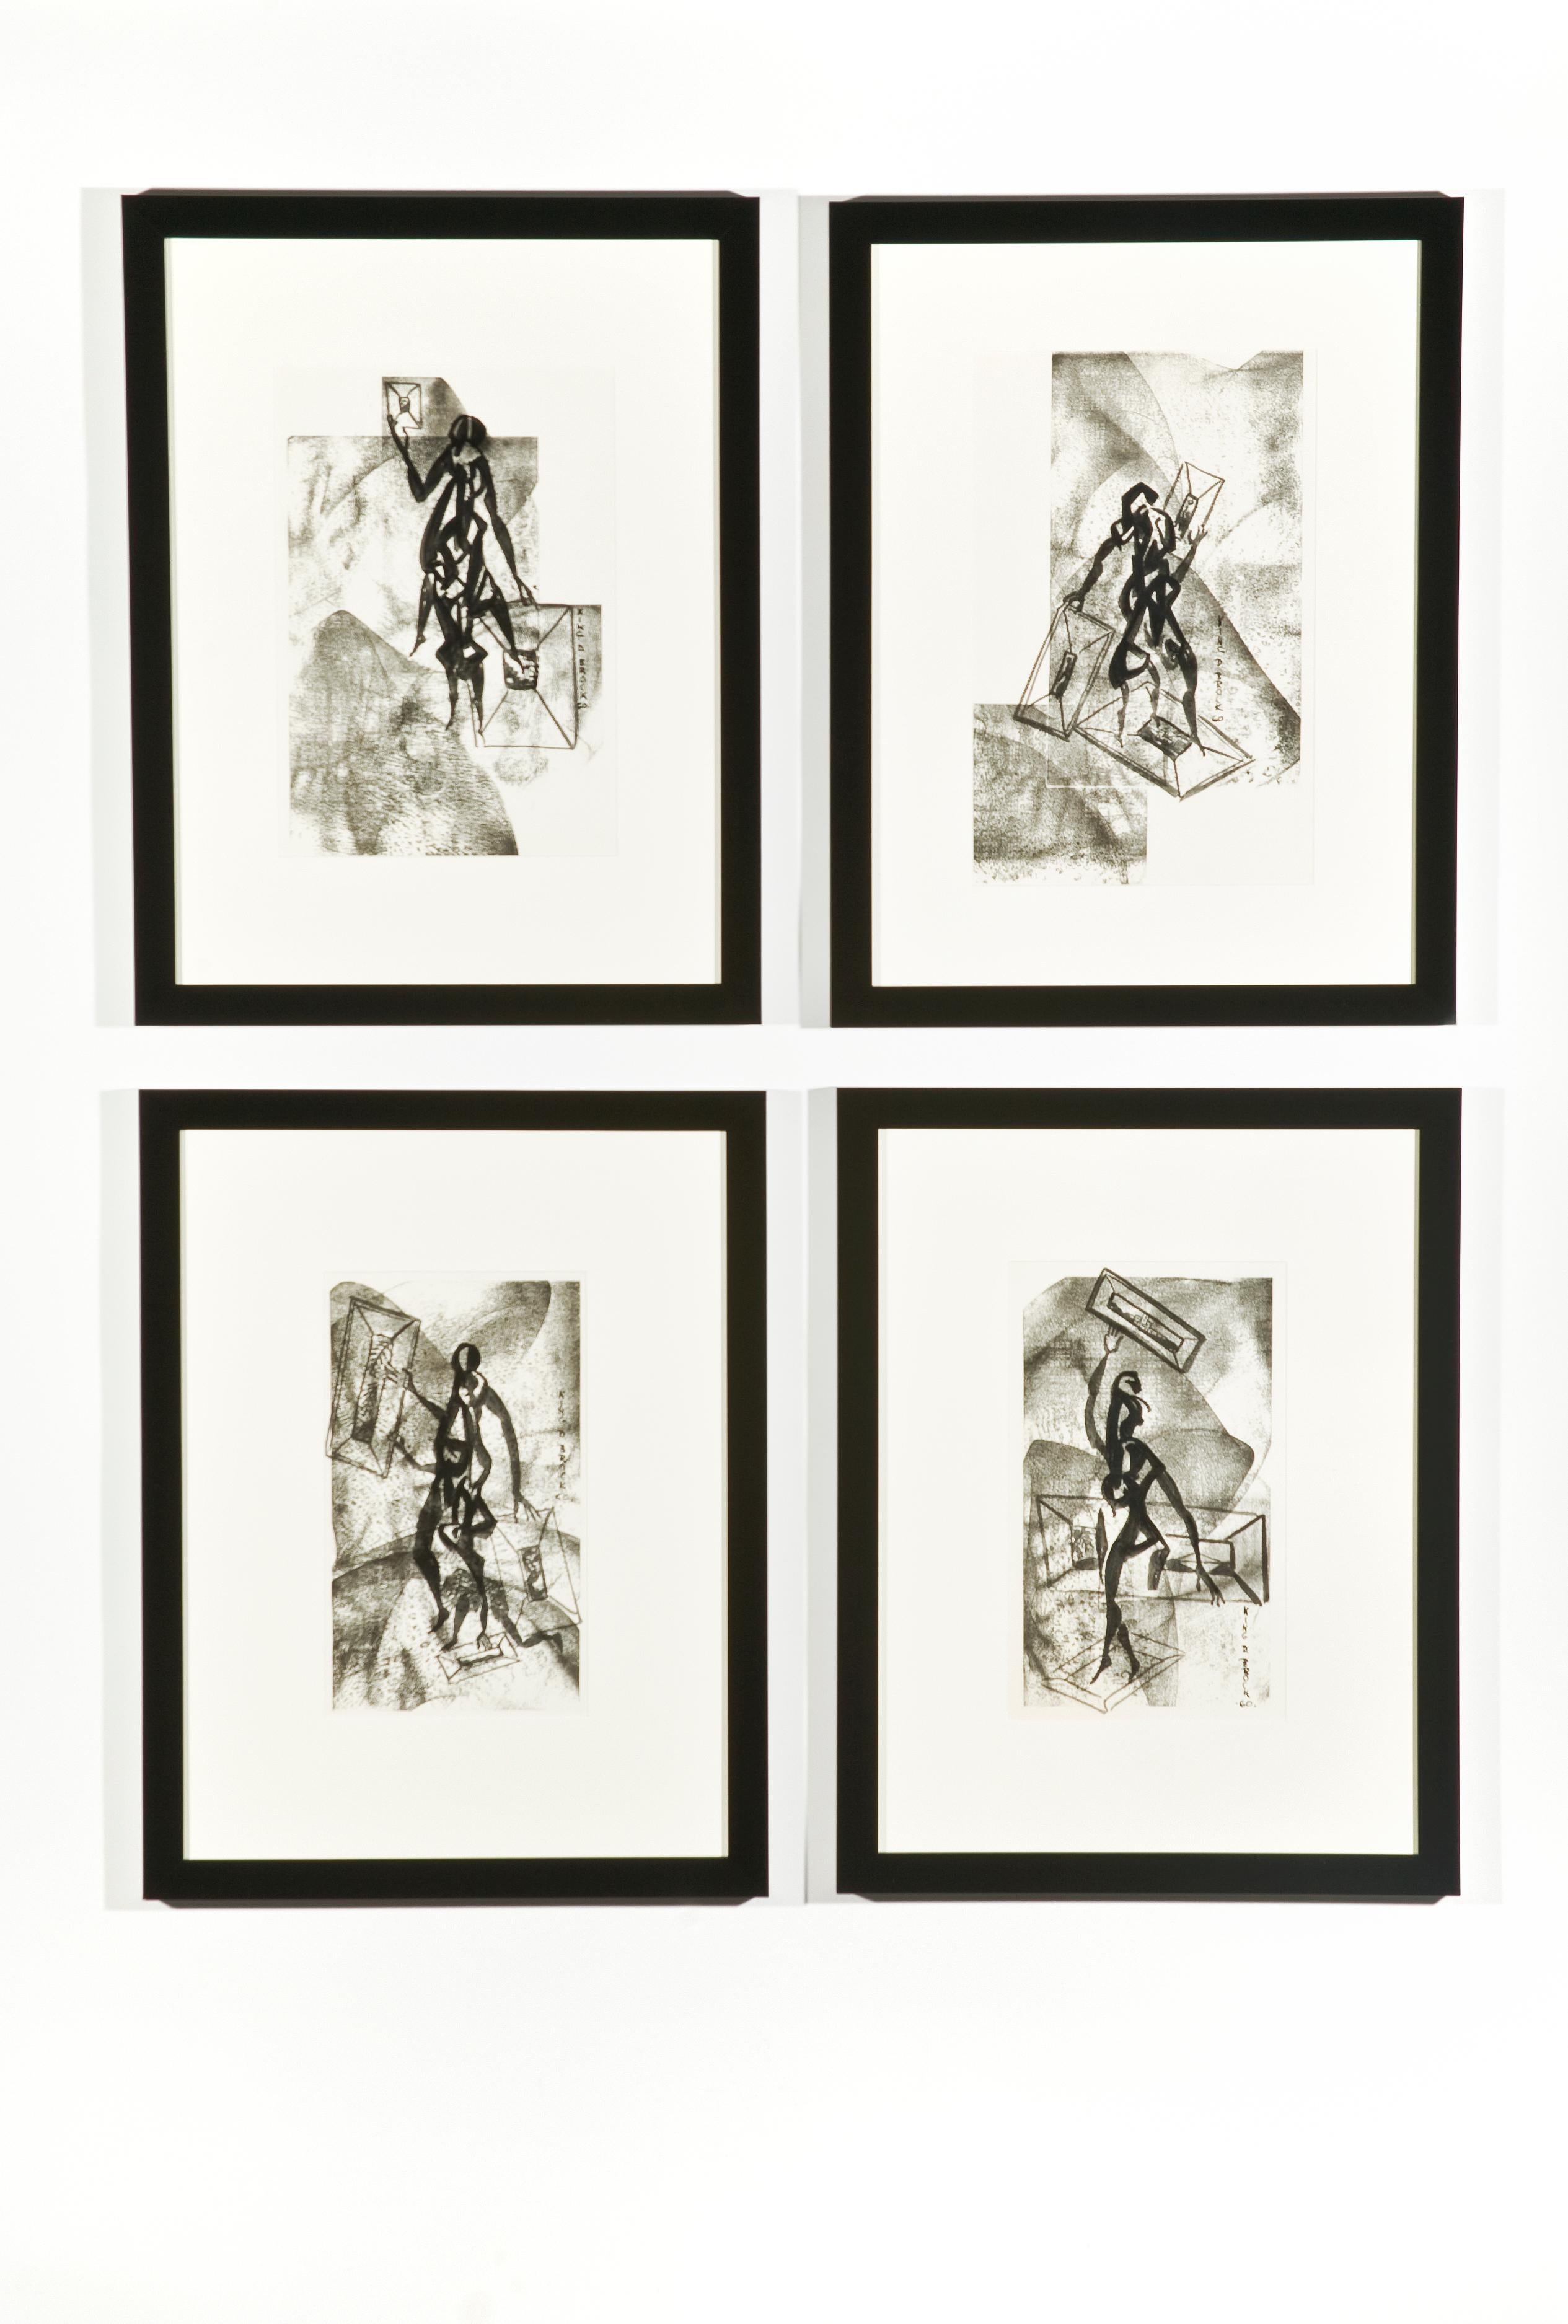 Group of 4 Original Art by King D. Brock
Black and White Drawings of 